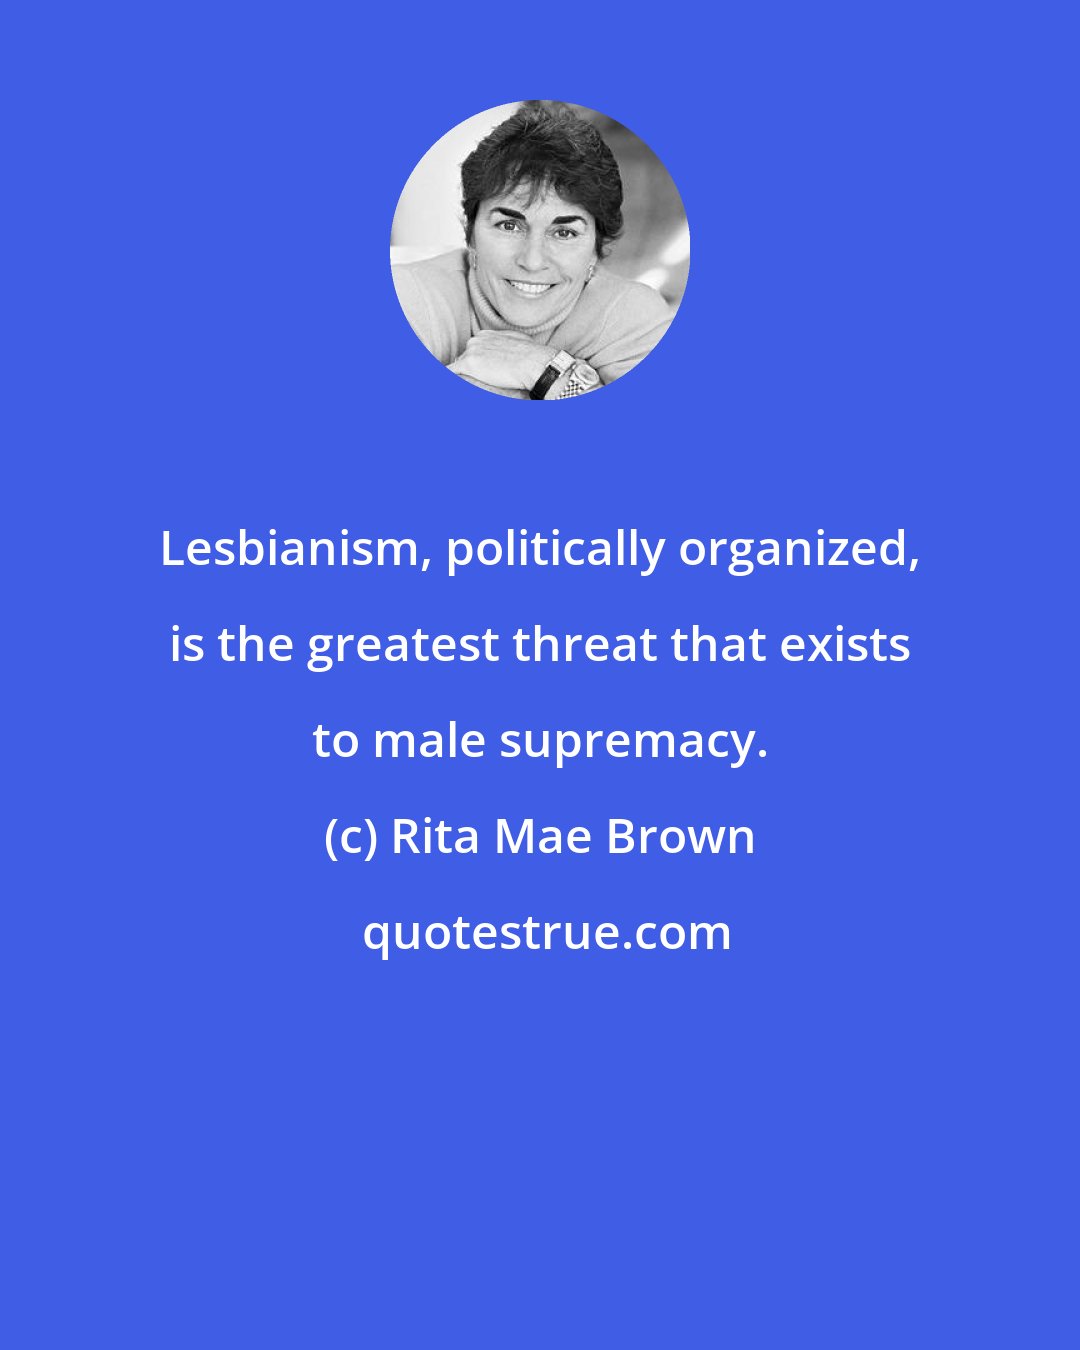 Rita Mae Brown: Lesbianism, politically organized, is the greatest threat that exists to male supremacy.